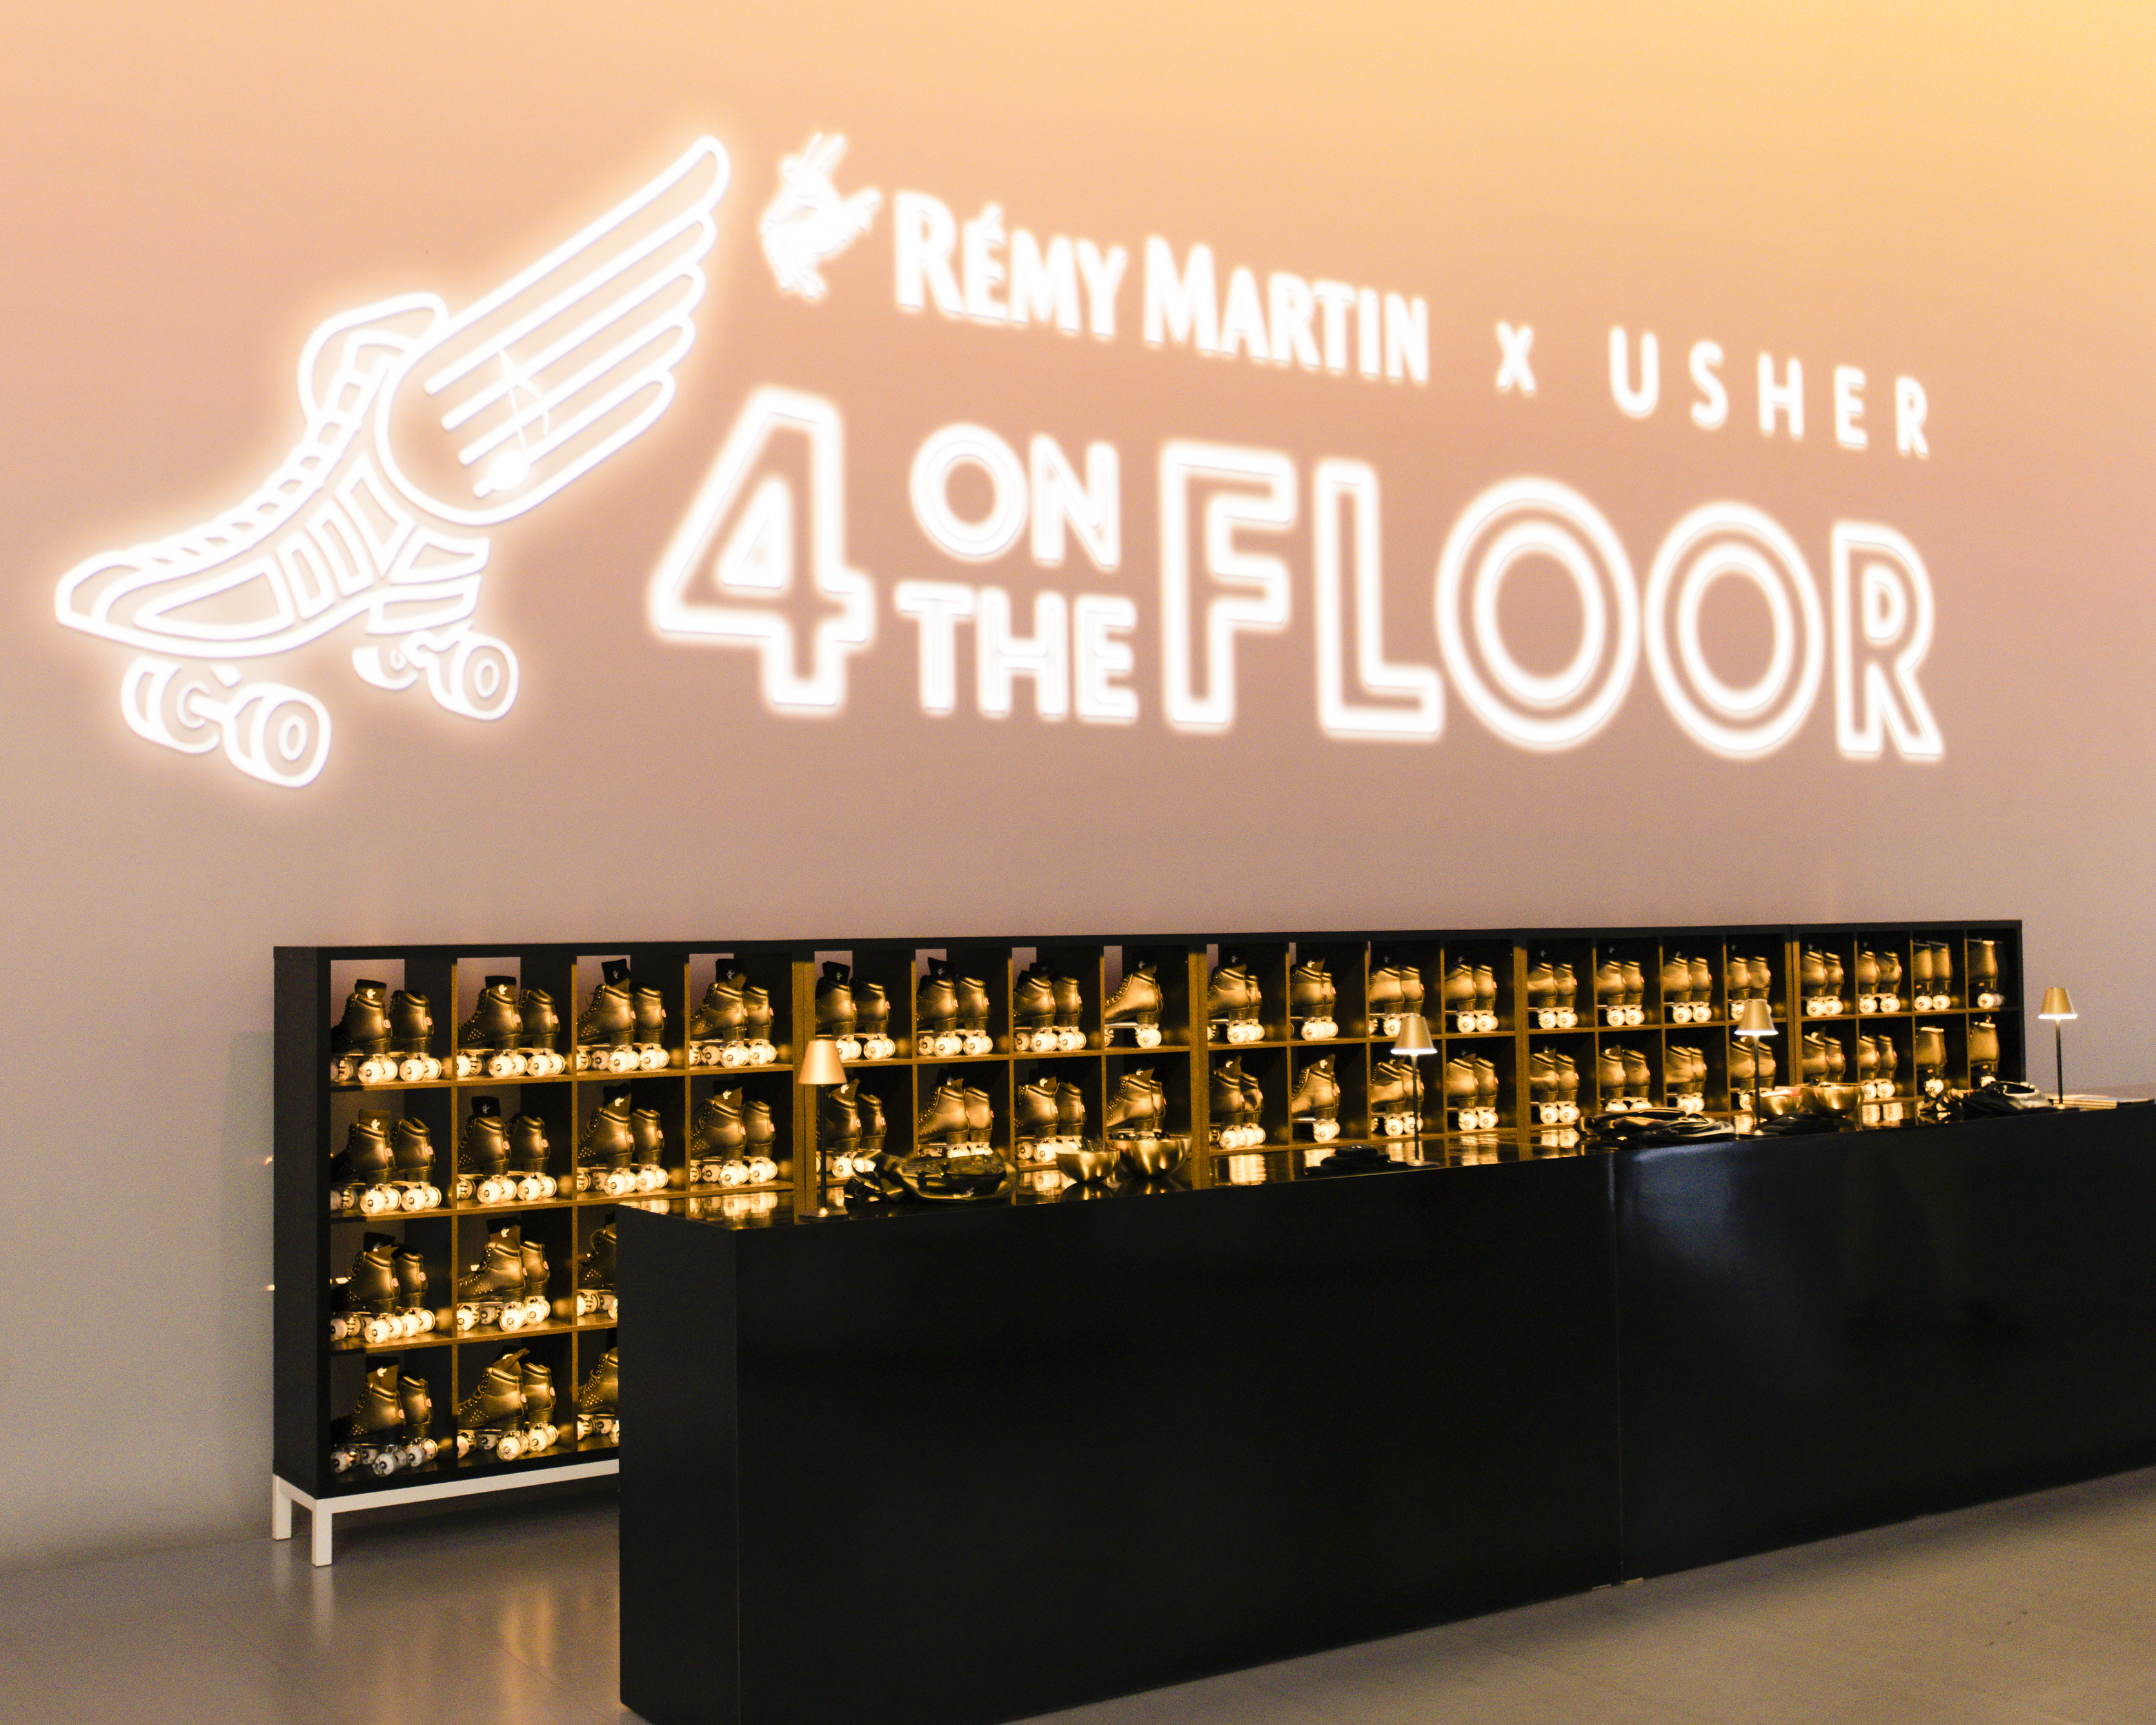 Usher x Rémy Martin 'Life Is A Melody' campaign assets